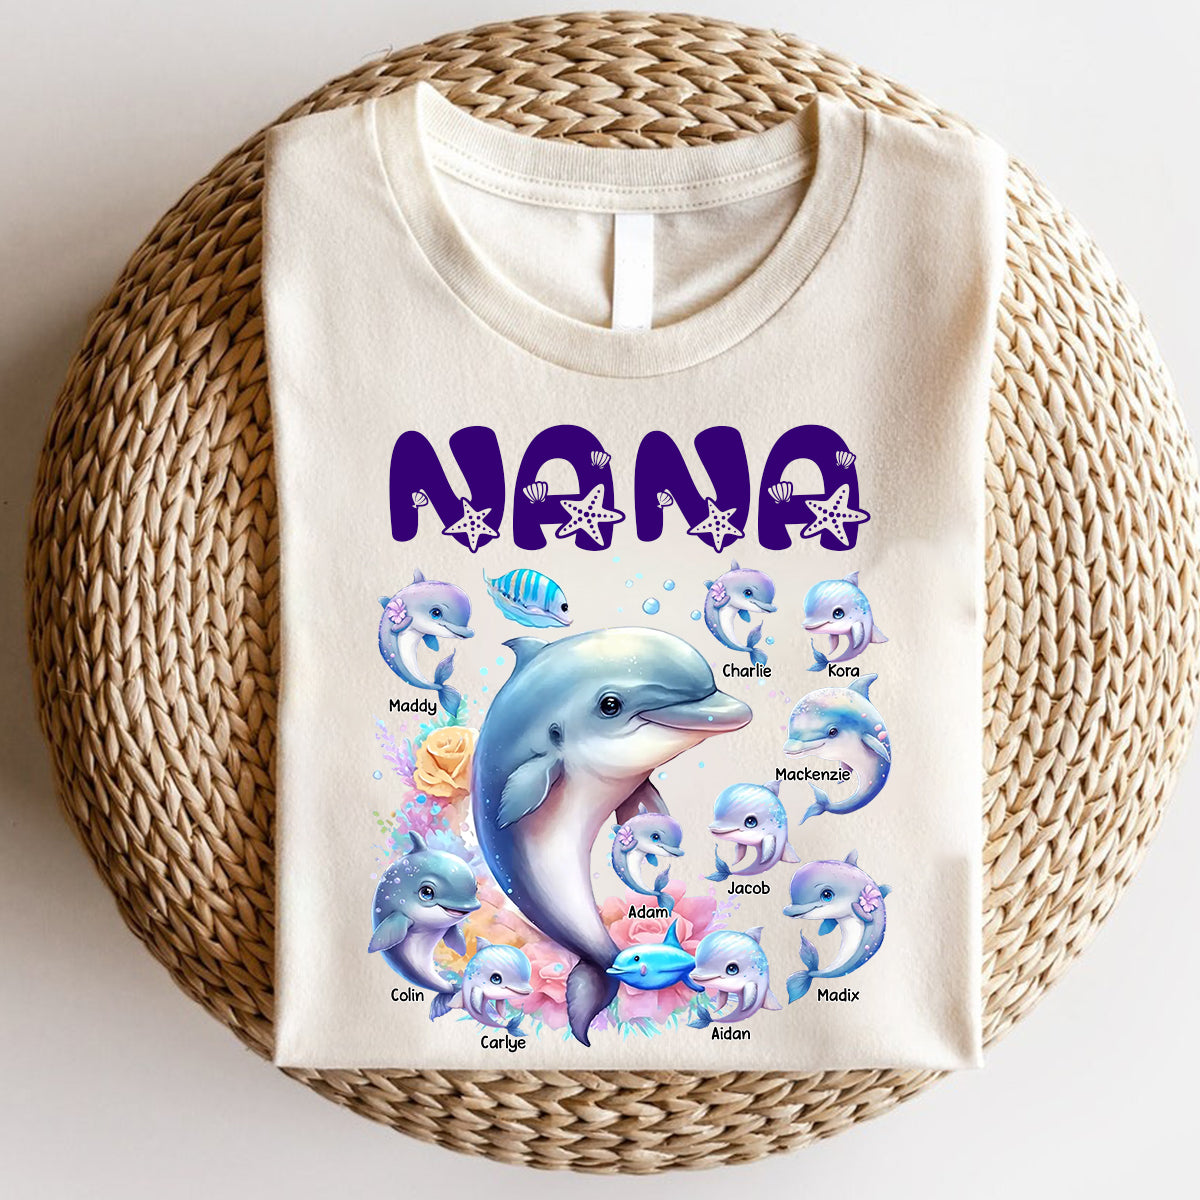 Personalized Grandma Dolphin with Kid Names Pure Cotton T-Shirt